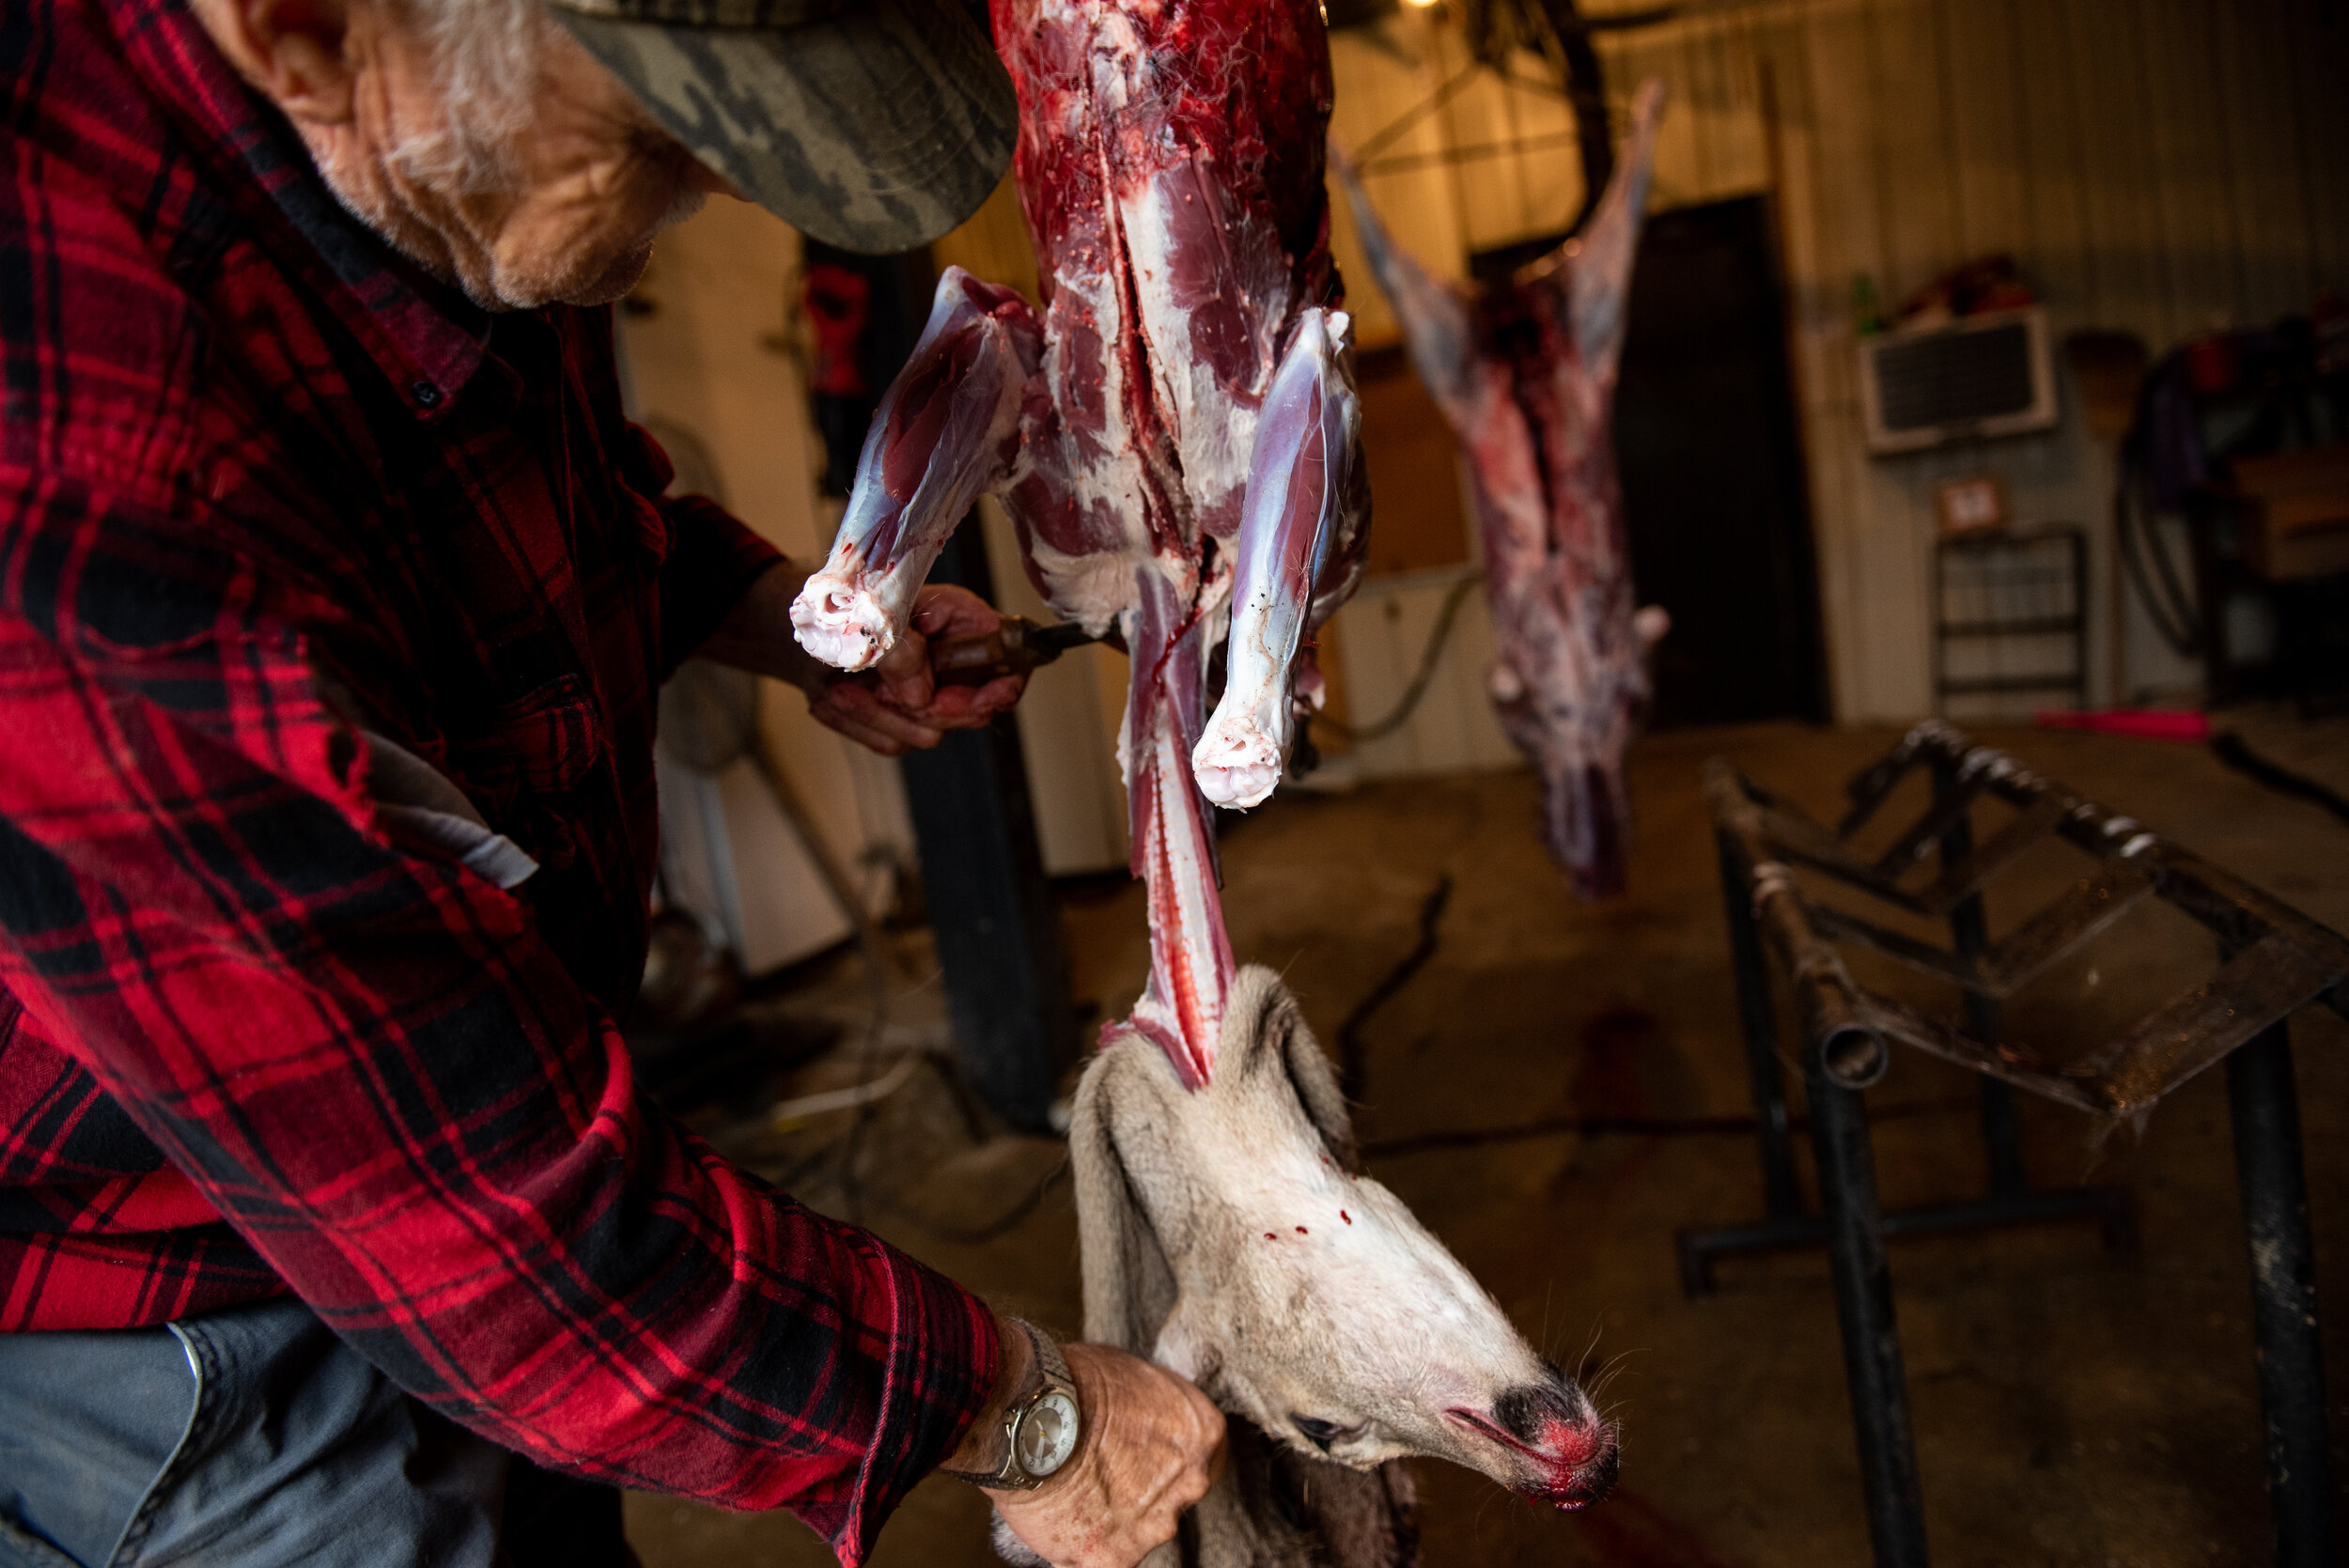   Wayne Northcutt, resident of Cynthiana, Ky., skins a deer in his garage on Oct. 29, 2021.   